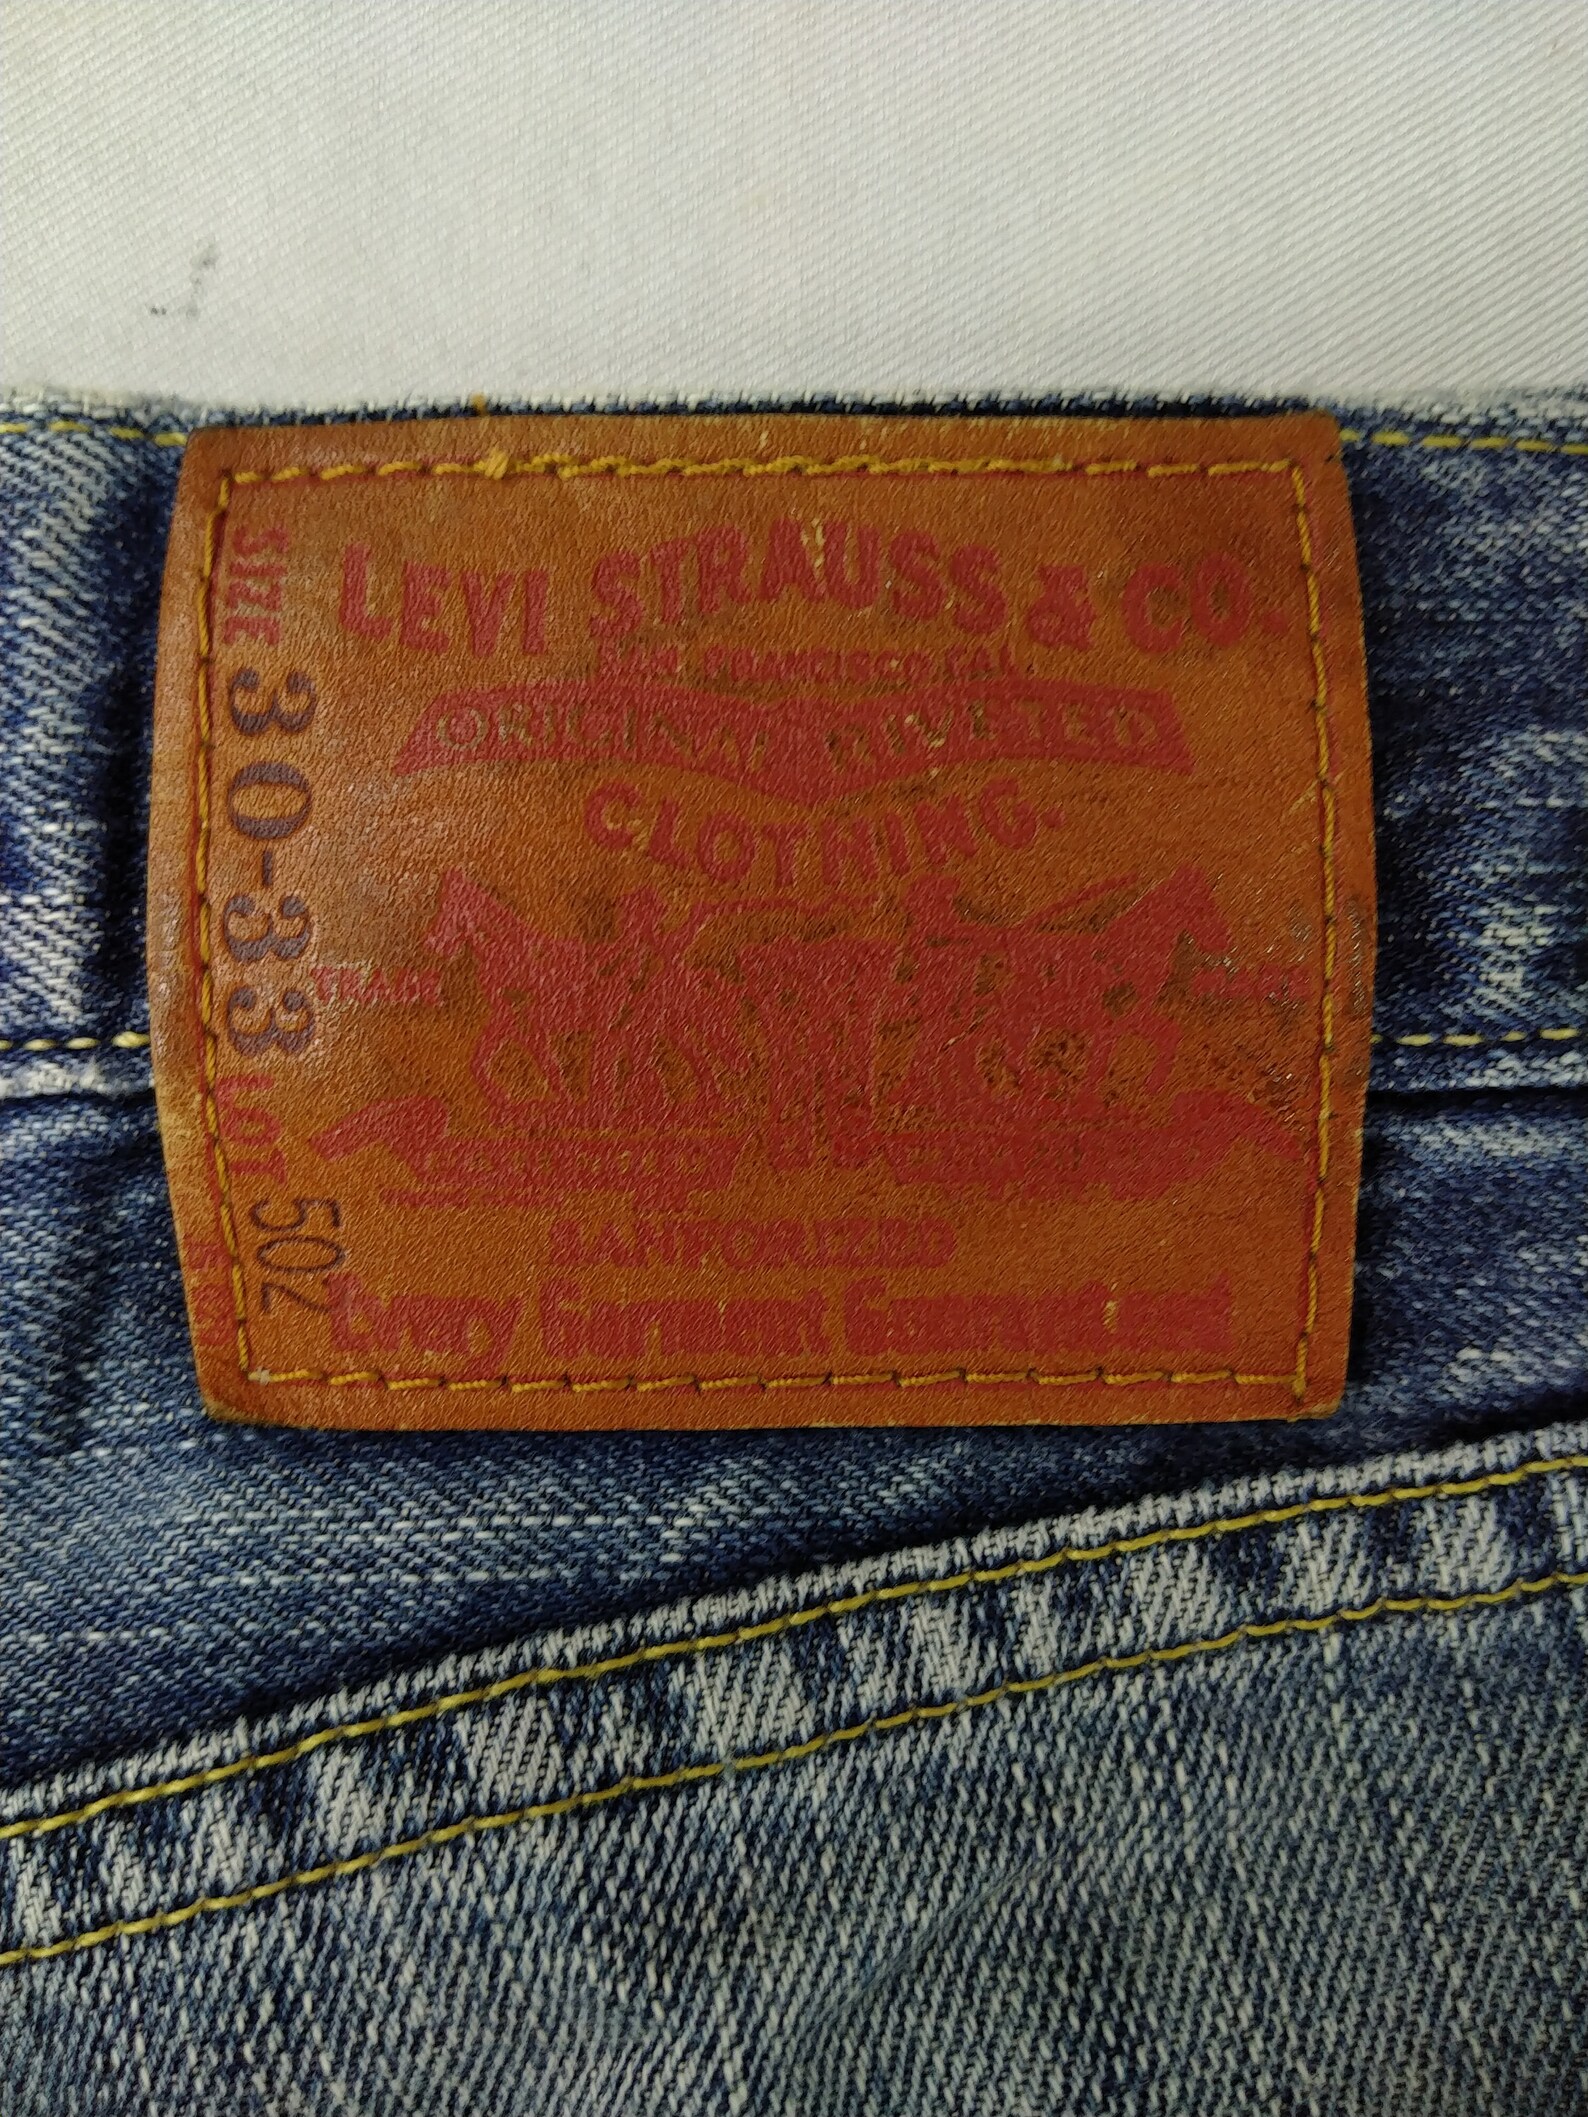 Levi's 502 Distressed Ripped Denim 30x28.5 Red Tab Faded - Etsy